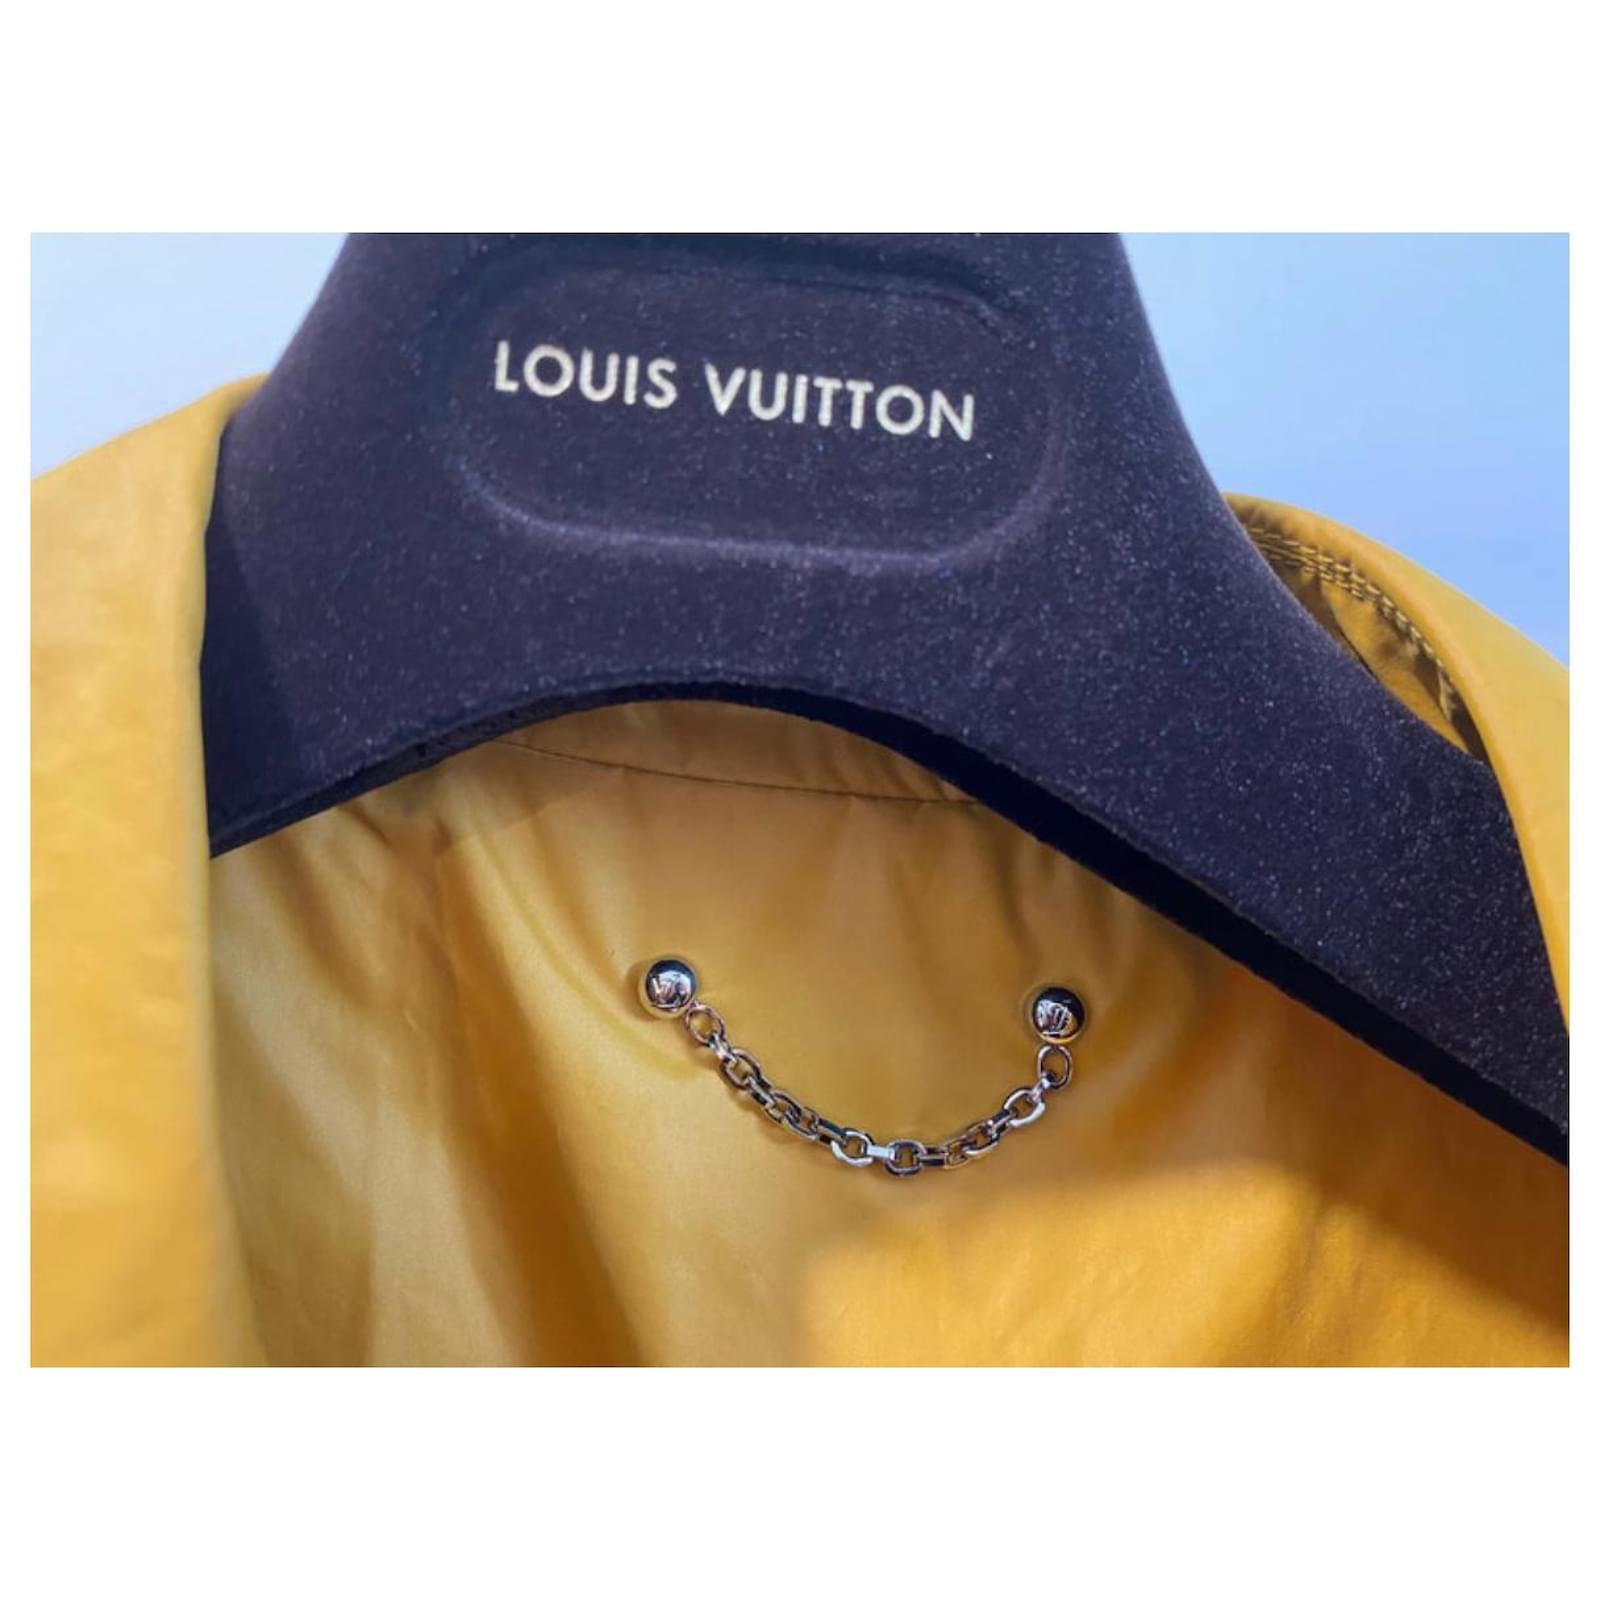 Louis Vuitton Brand New W/Tags Trench Coat / Windbreaker Yellow